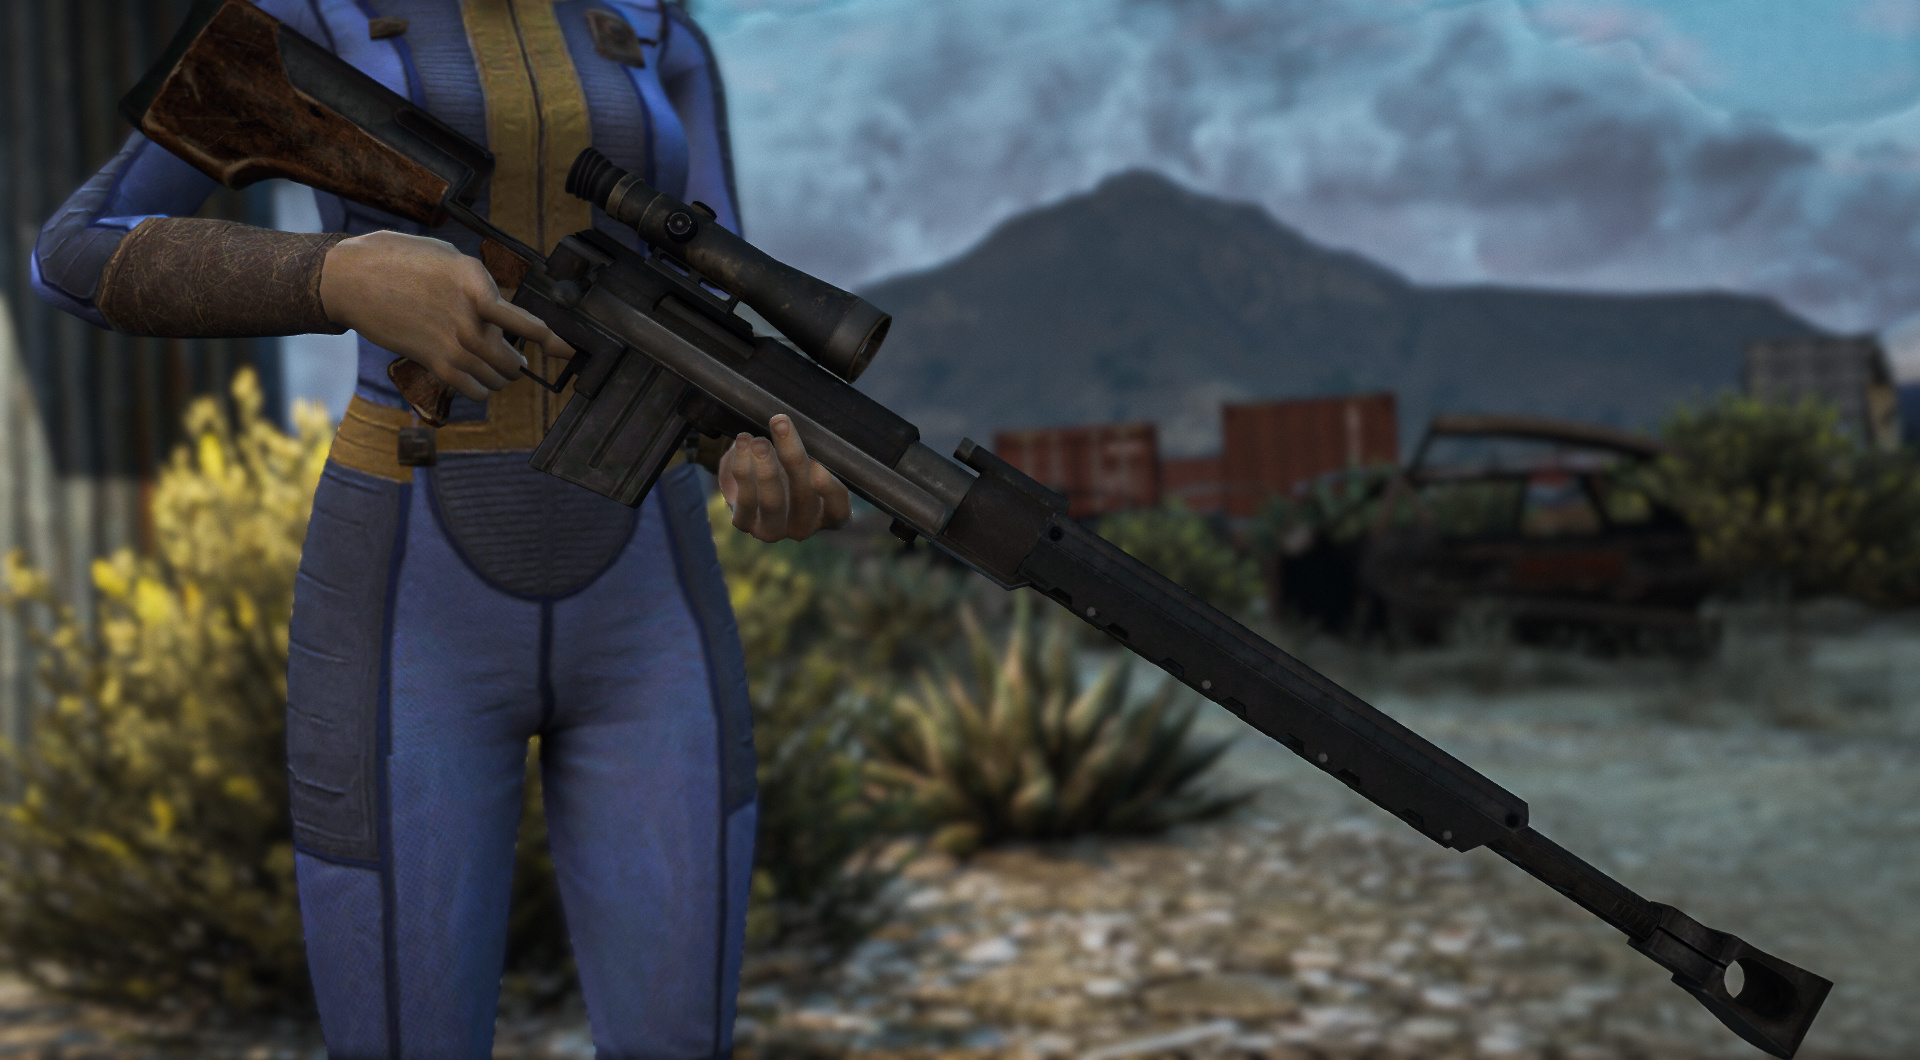 30 Fallout New Vegas Weapons For Fallout 4! - Fallout 4 Mods (PC